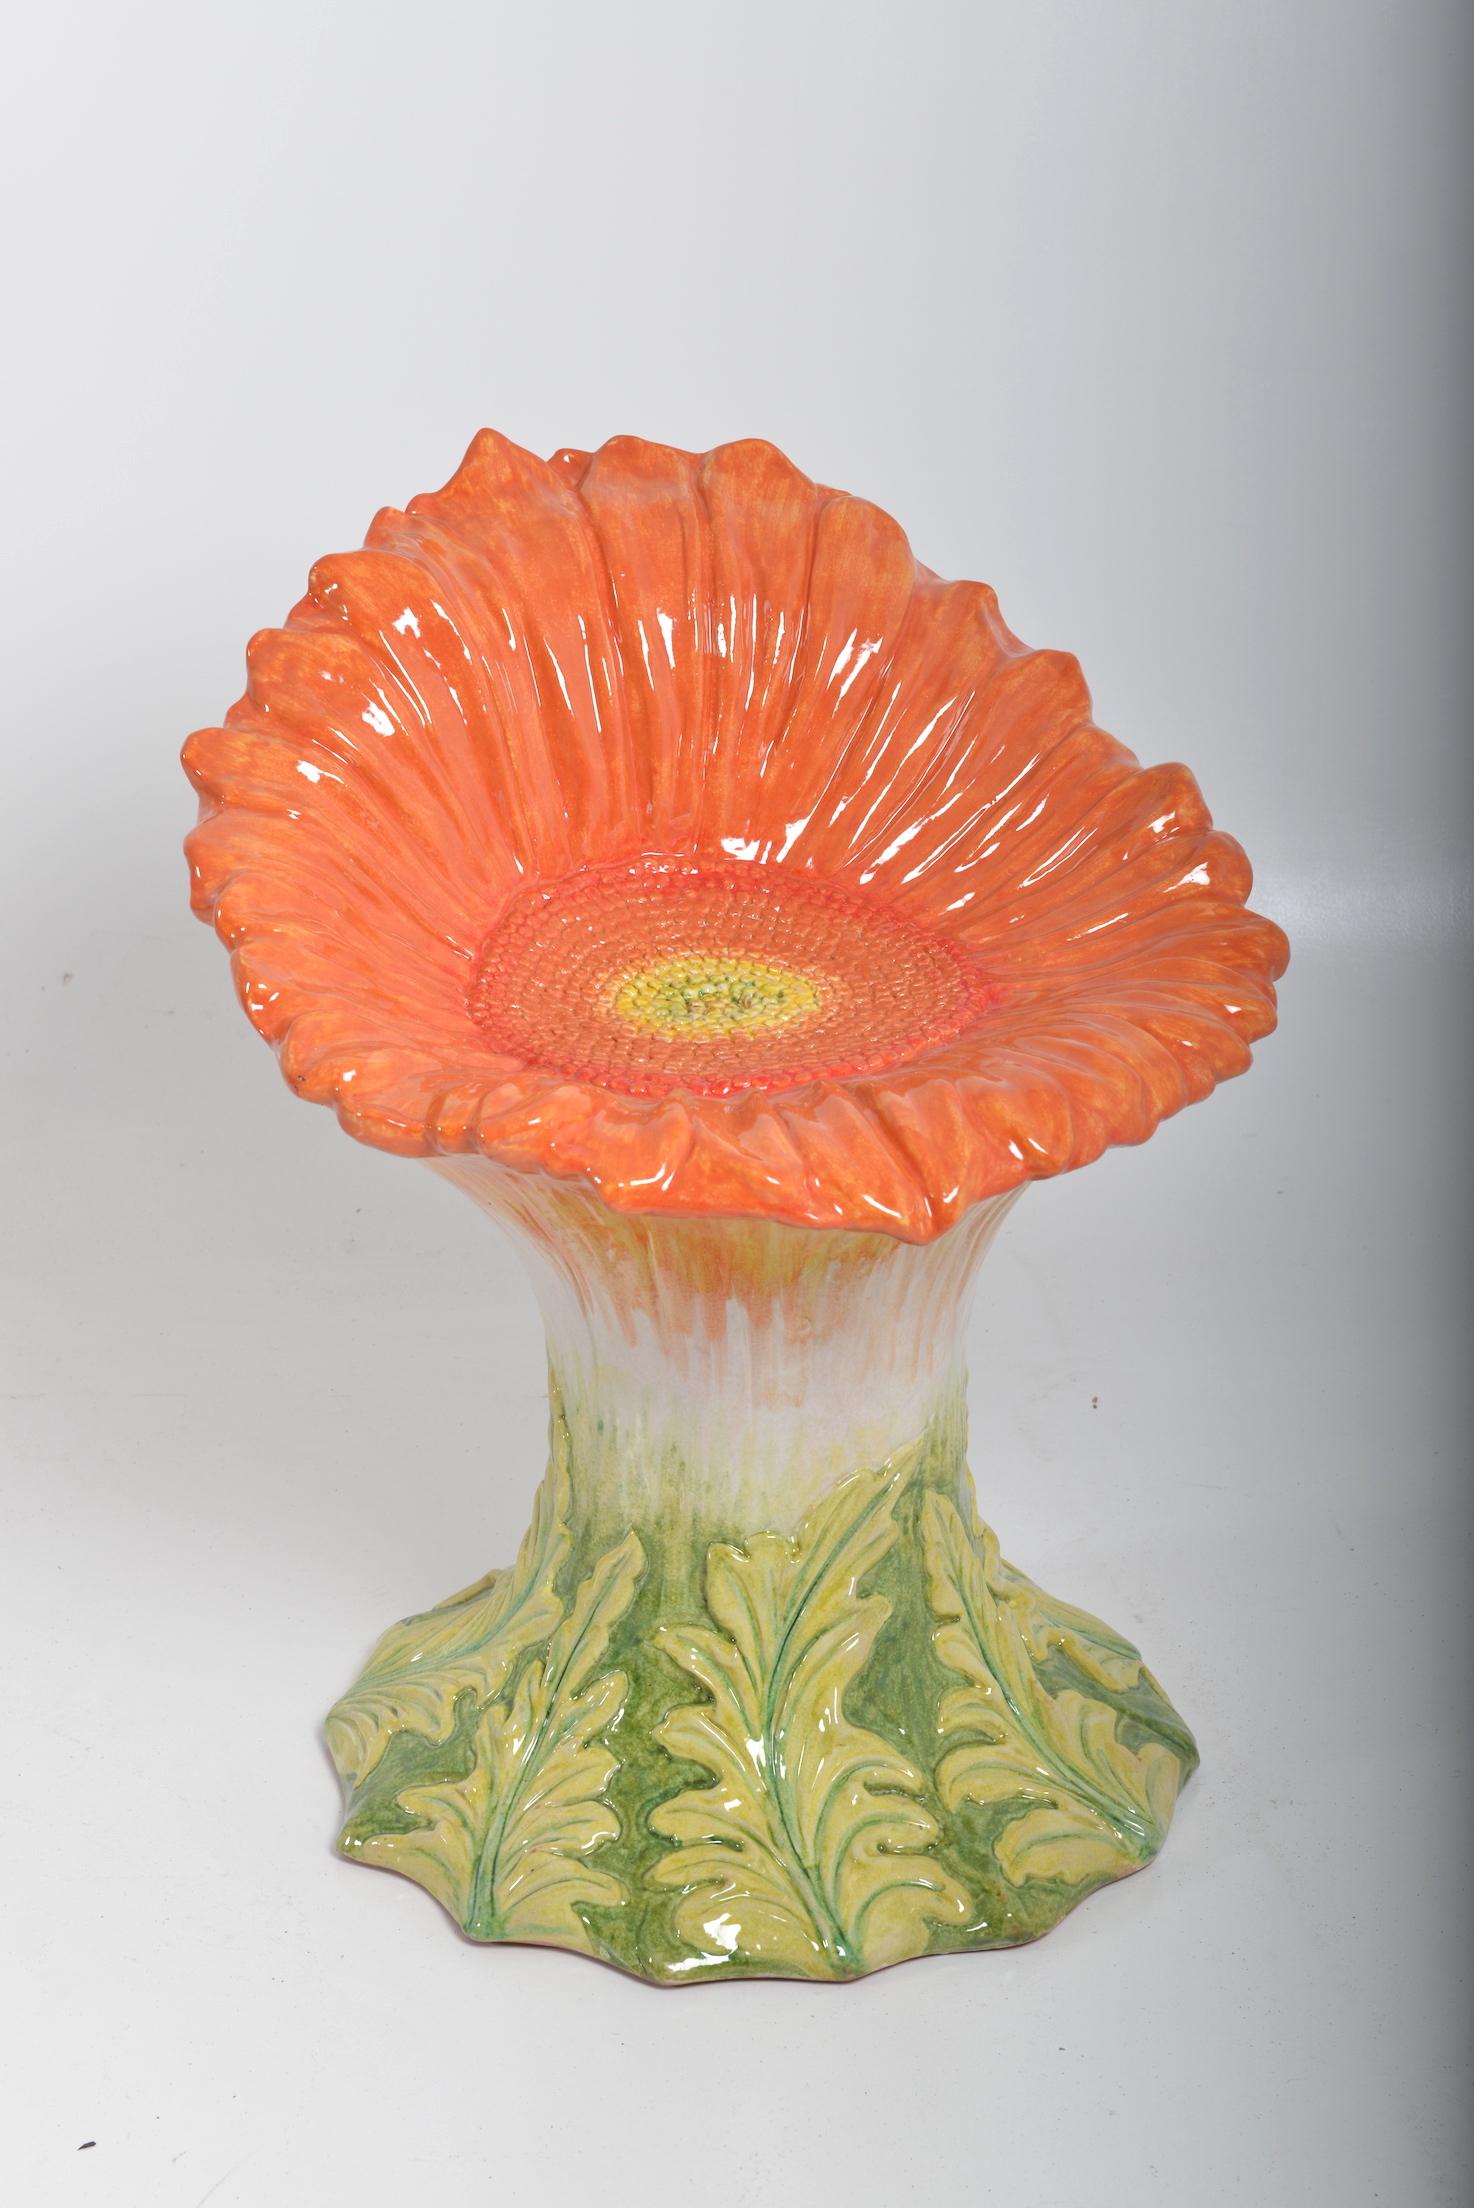 These flower seats / chairs, to be used in the garden, on your terrace, conservatory or inside your house are a joy of life. They are exuberant. A delight. Brilliantly colored they bring the sun in your life. The bases represent stylized acanthus